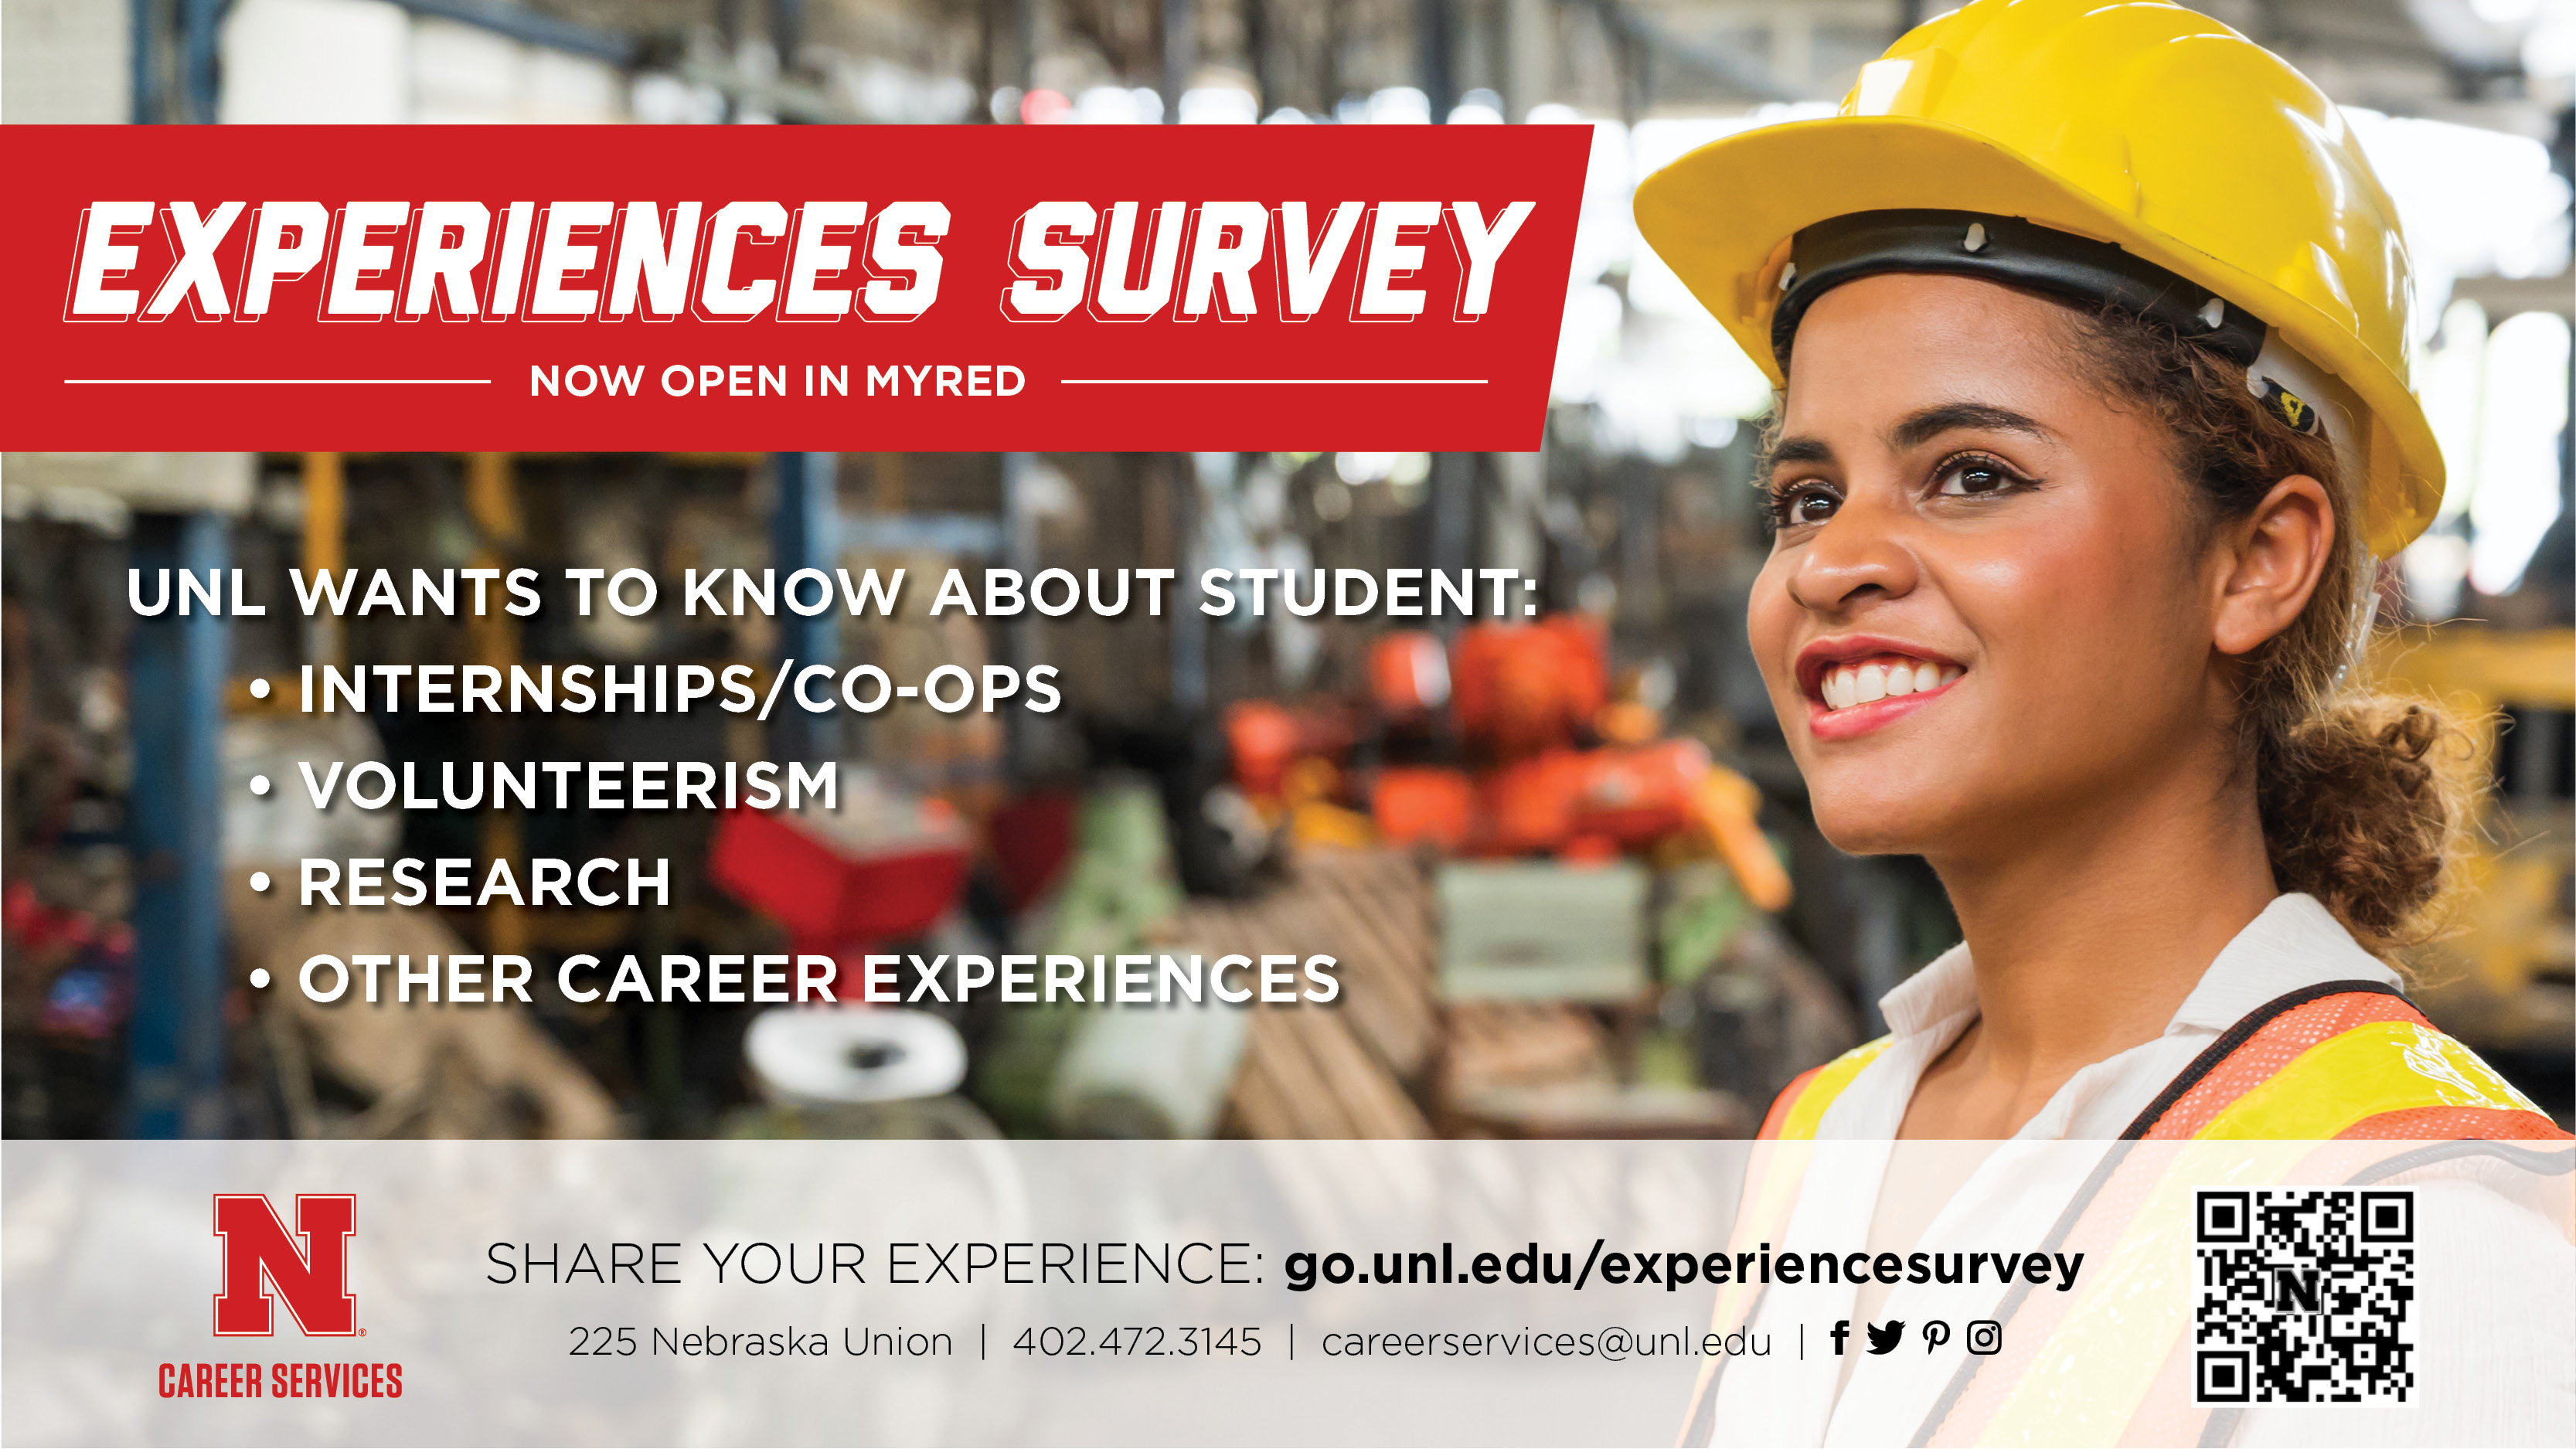 Encourage students to participate in the UNL Career Services Experiences Survey.